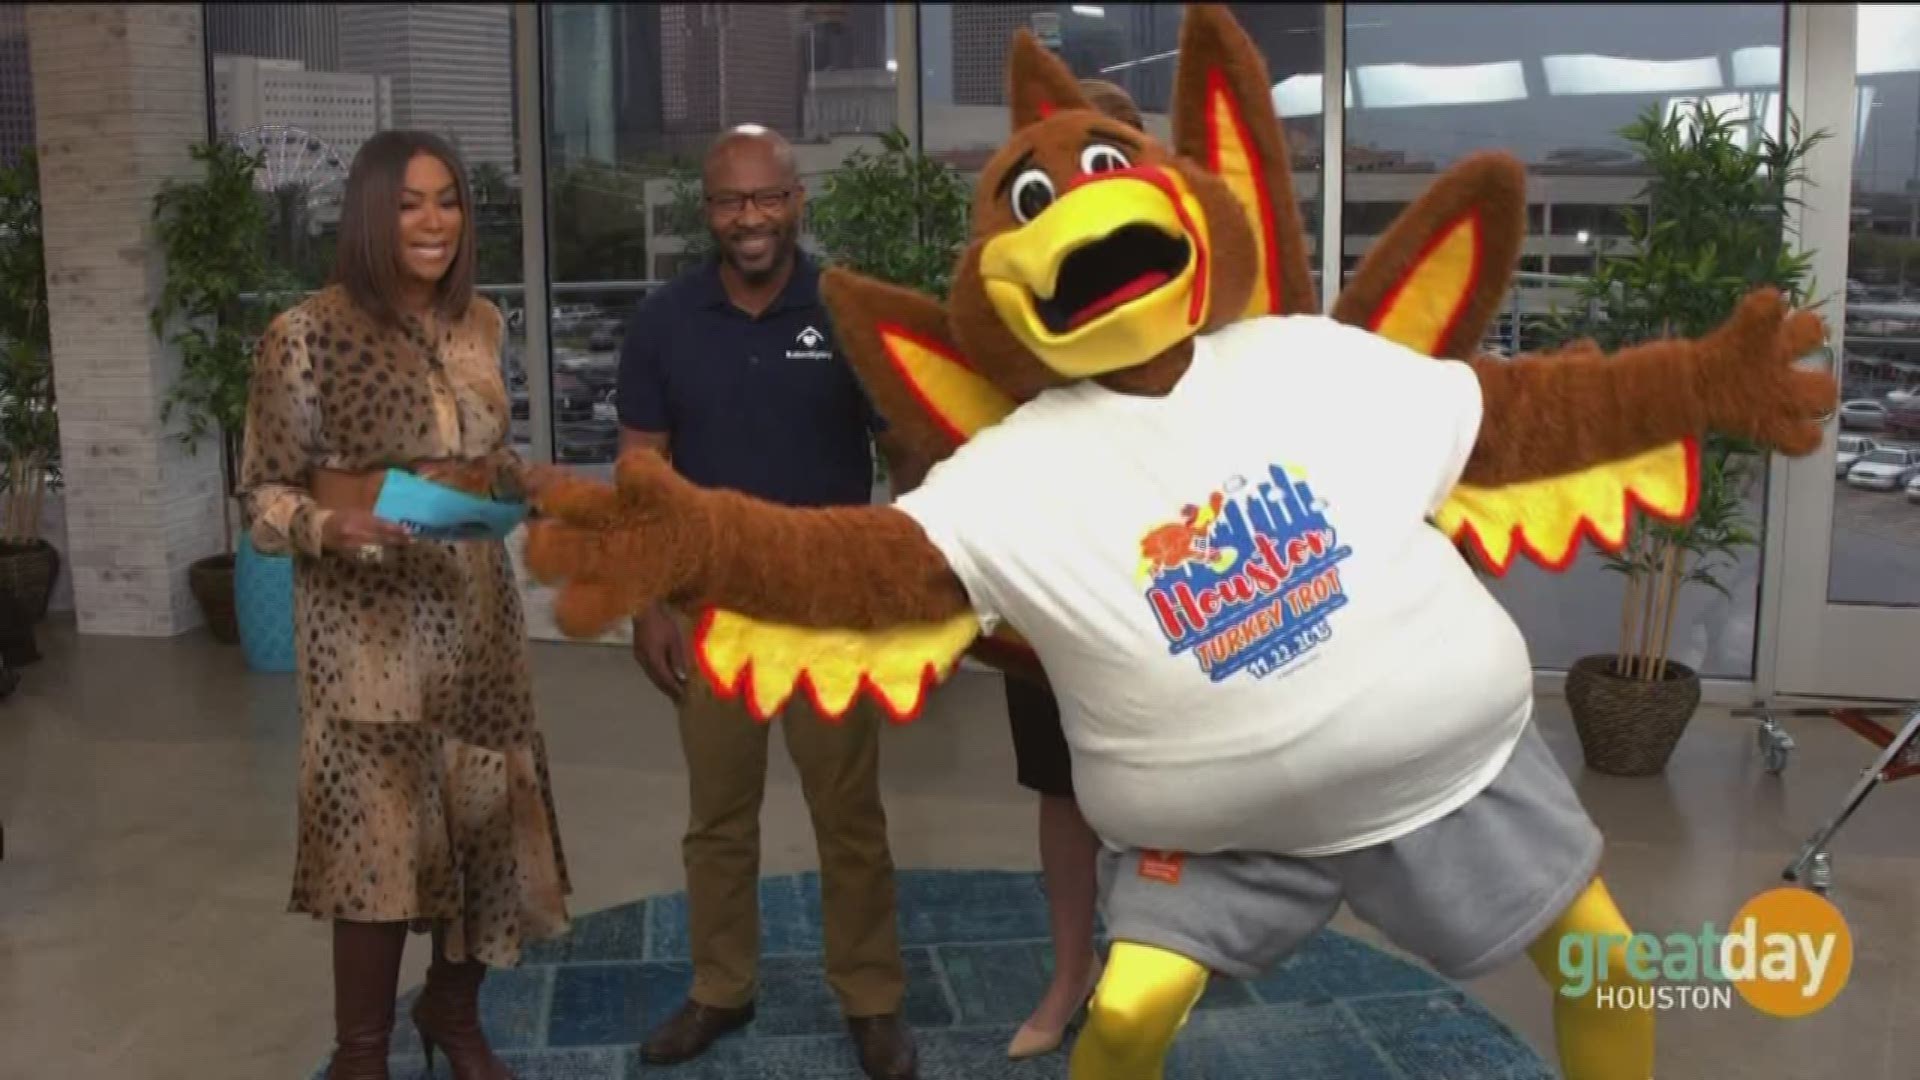 Frederick J. Goodall with BakerRipley explains how the Houston Turkey Trot is being used to serve Houston communities. Claudia Kreisle from race sponsor Phillips 66 joined to speak about the role the race plays in community wellness.